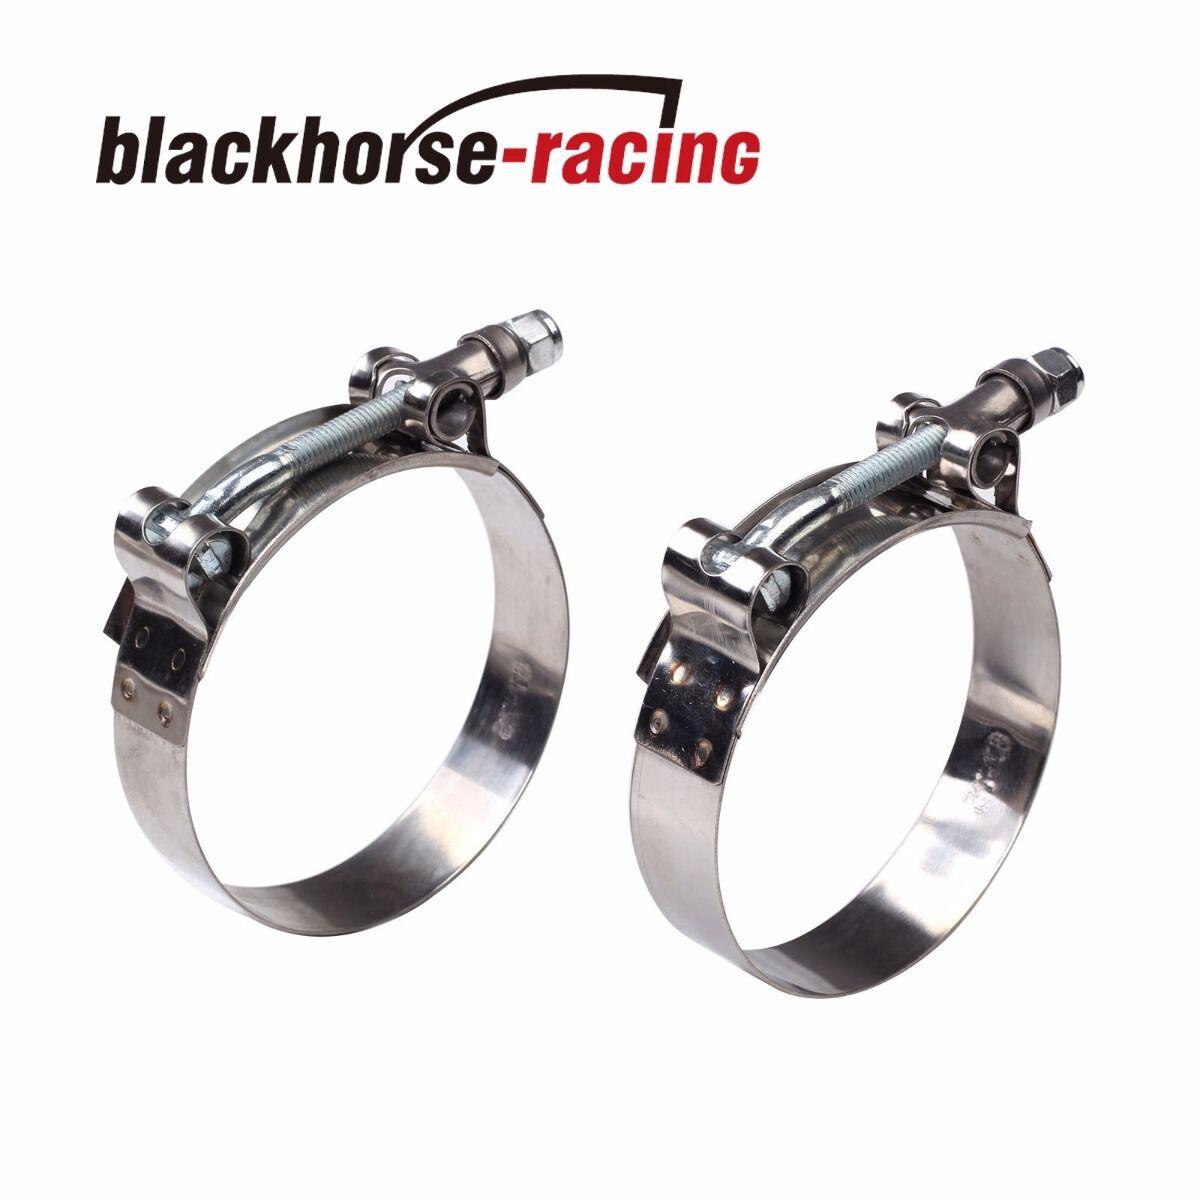 2PC For 3-1/4'' Hose (3.5"-3.82") 301 Stainless Steel T Bolt Clamps 89mm-97mm - www.blackhorse-racing.com